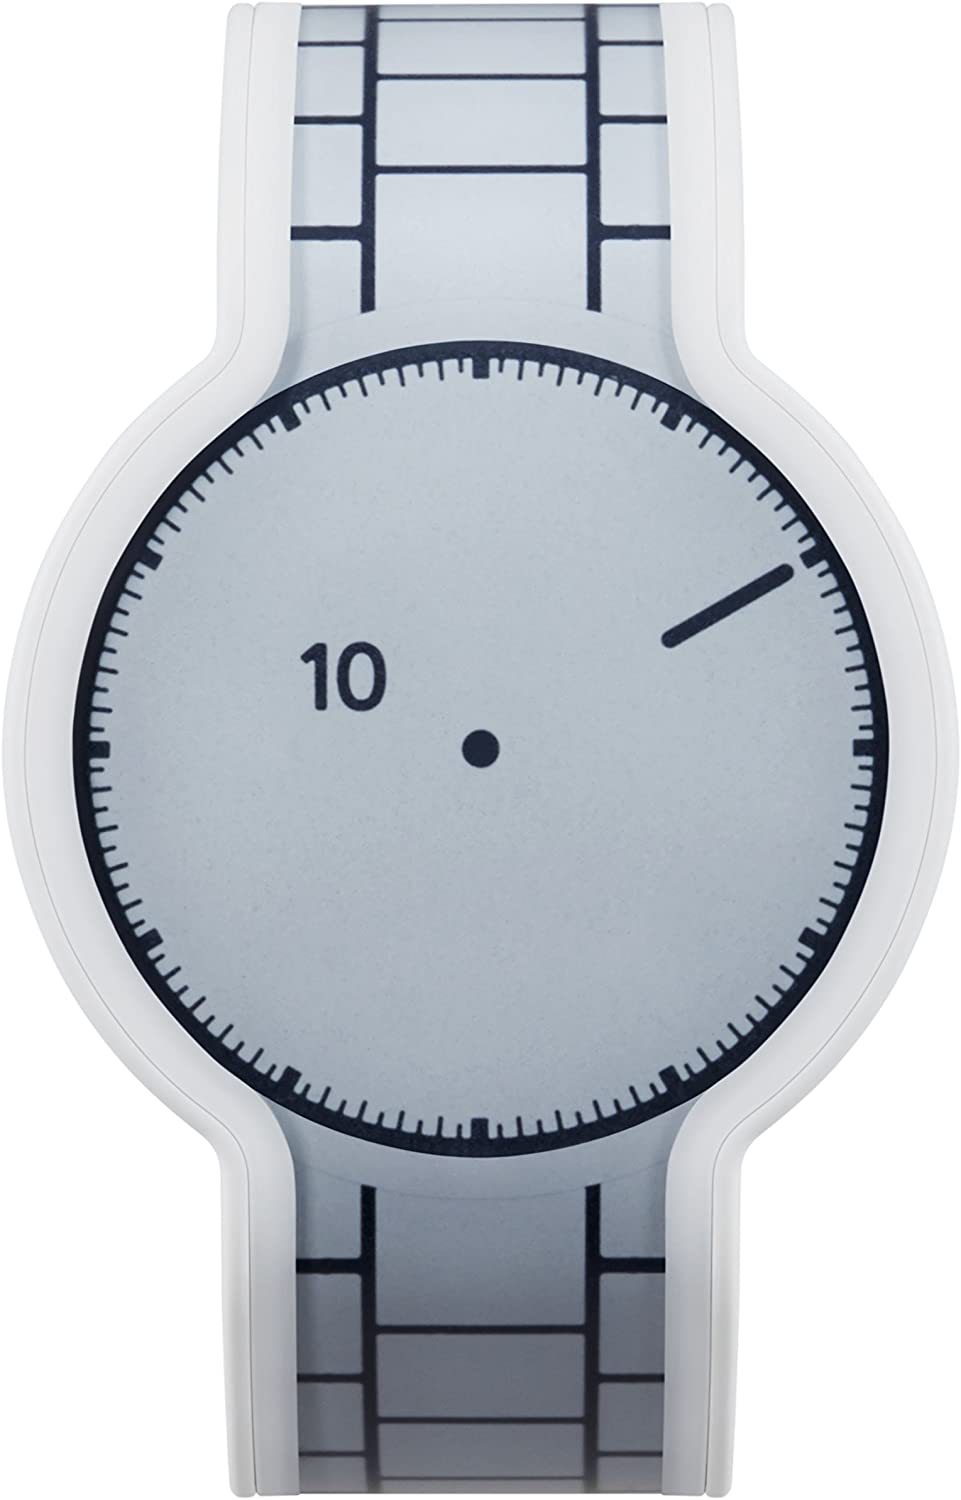 Sony Fes Watch with E INK - e-Reader